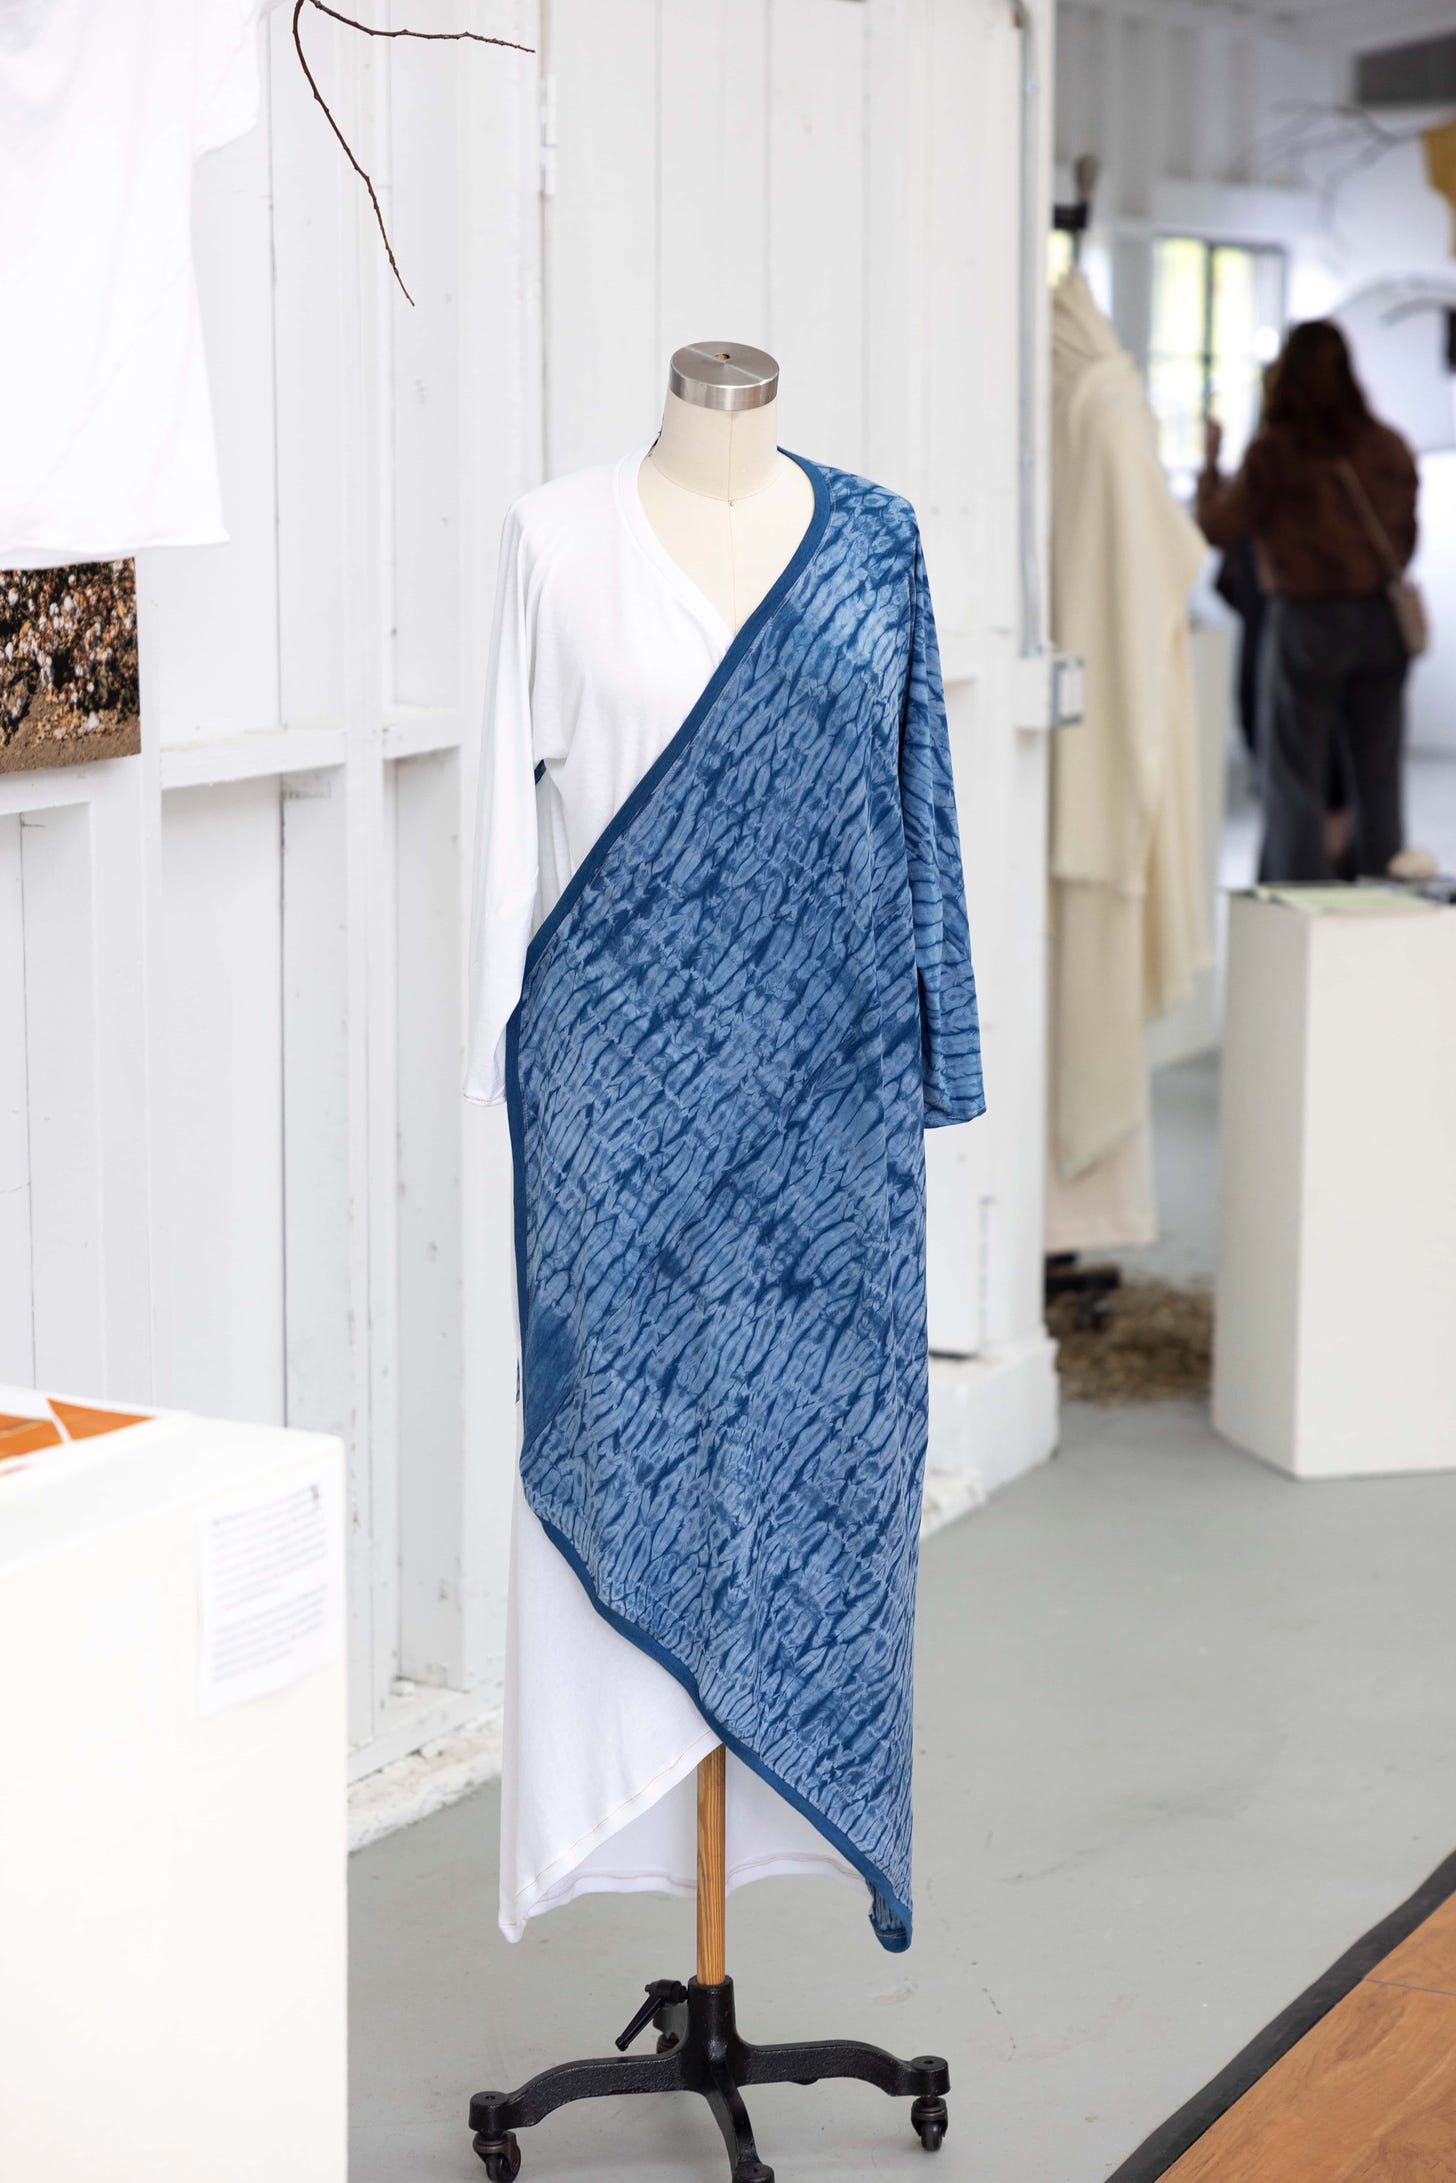 14.5-Square Wrap Dress as shown at Fibershed Design Challenge final showcase. Photo by Paige Green.